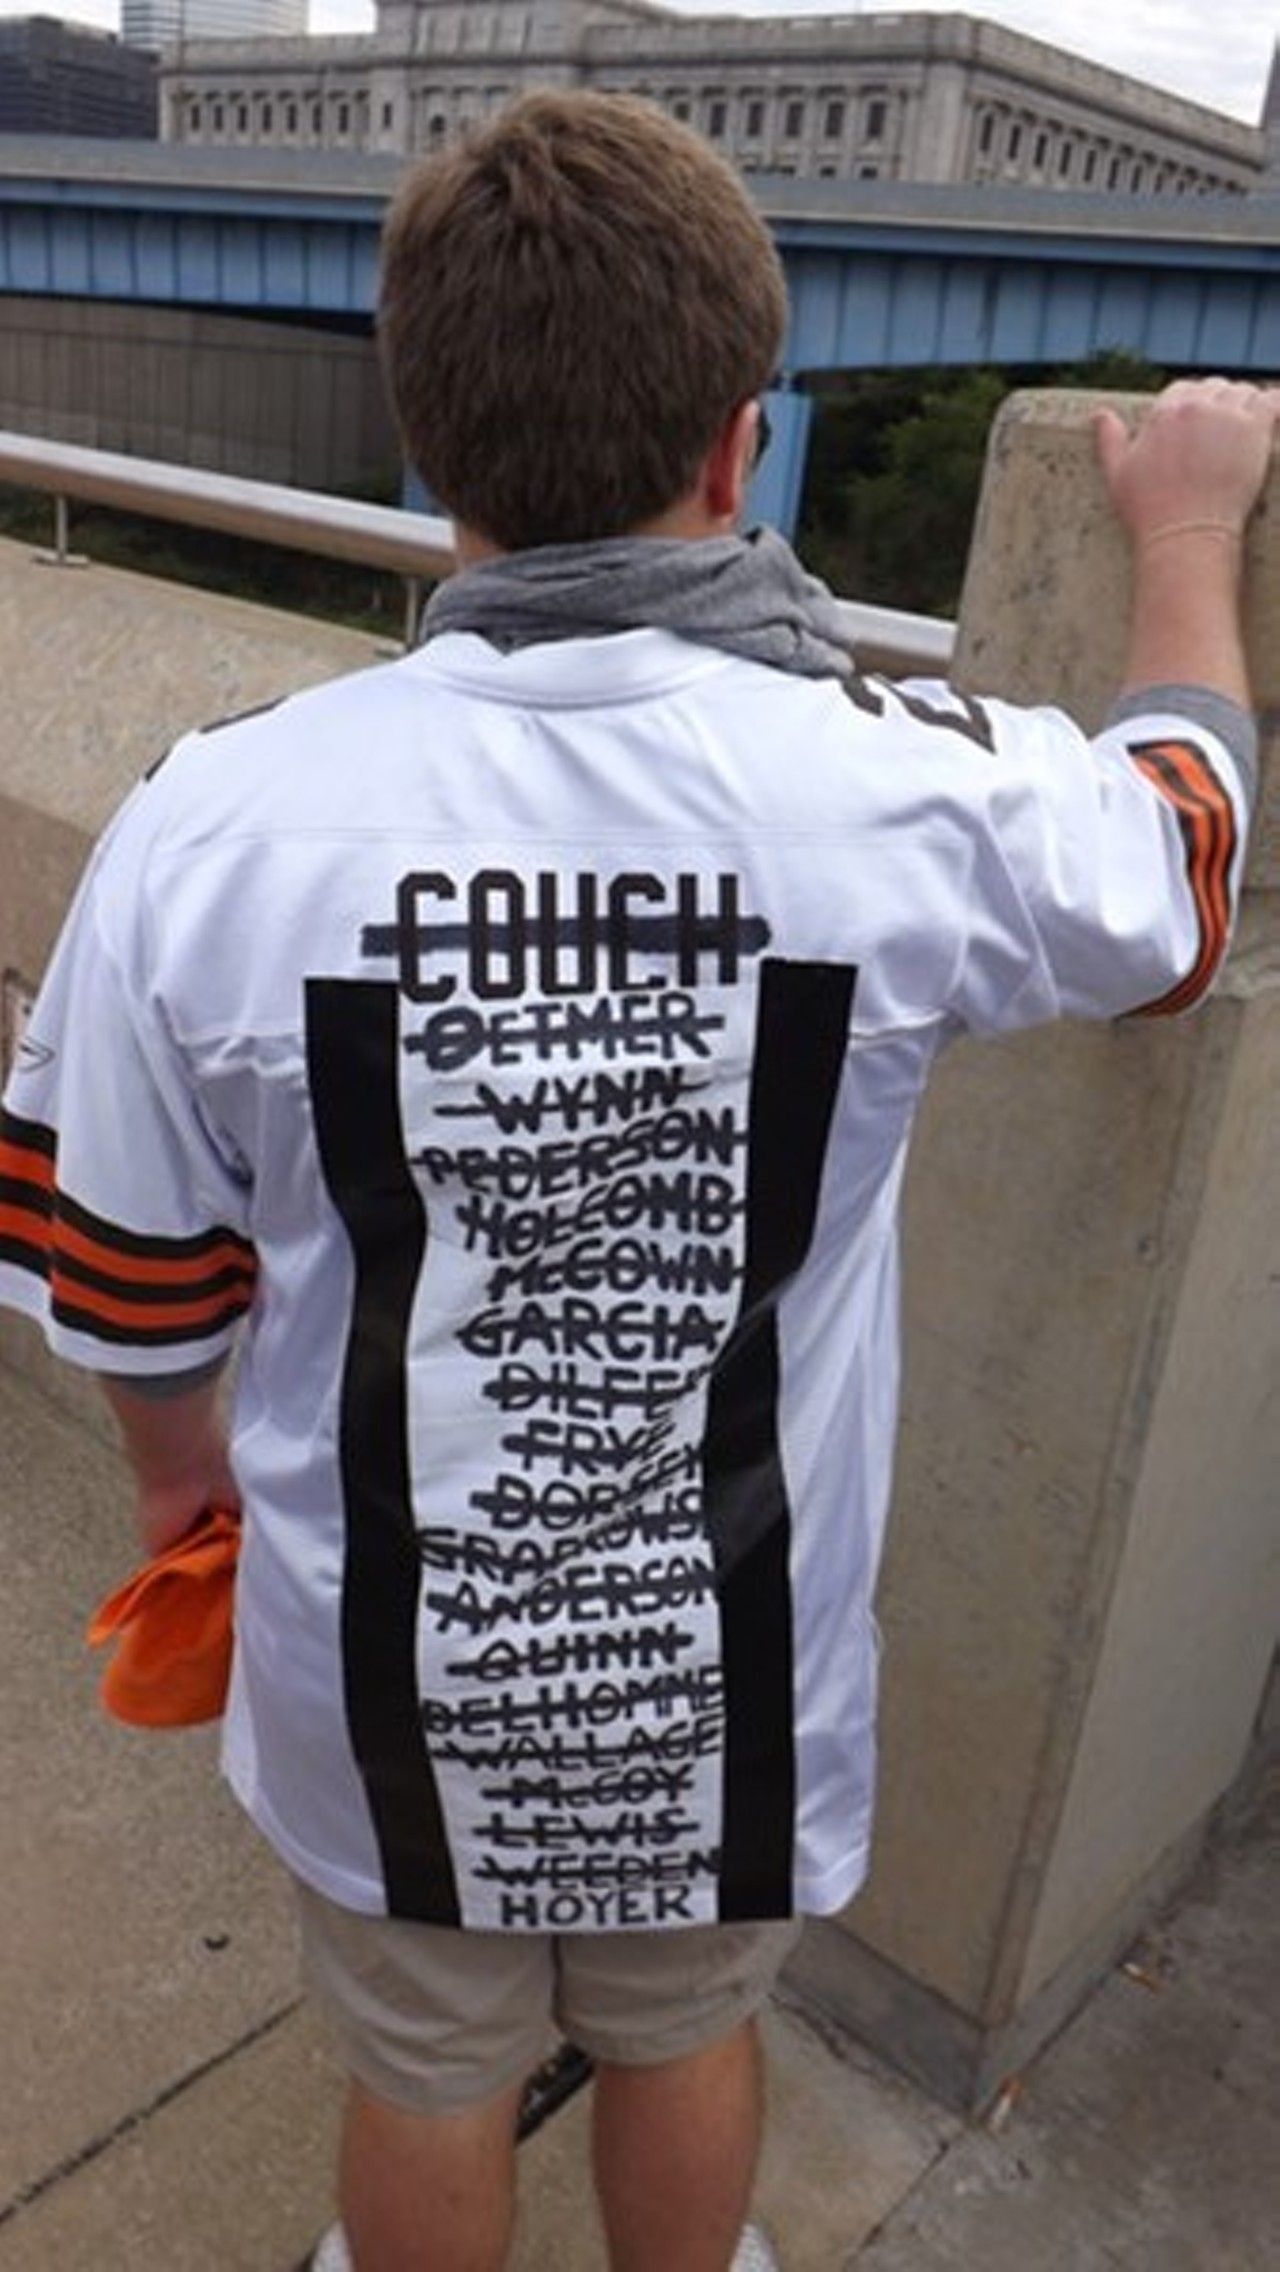 Because they are the Browns.